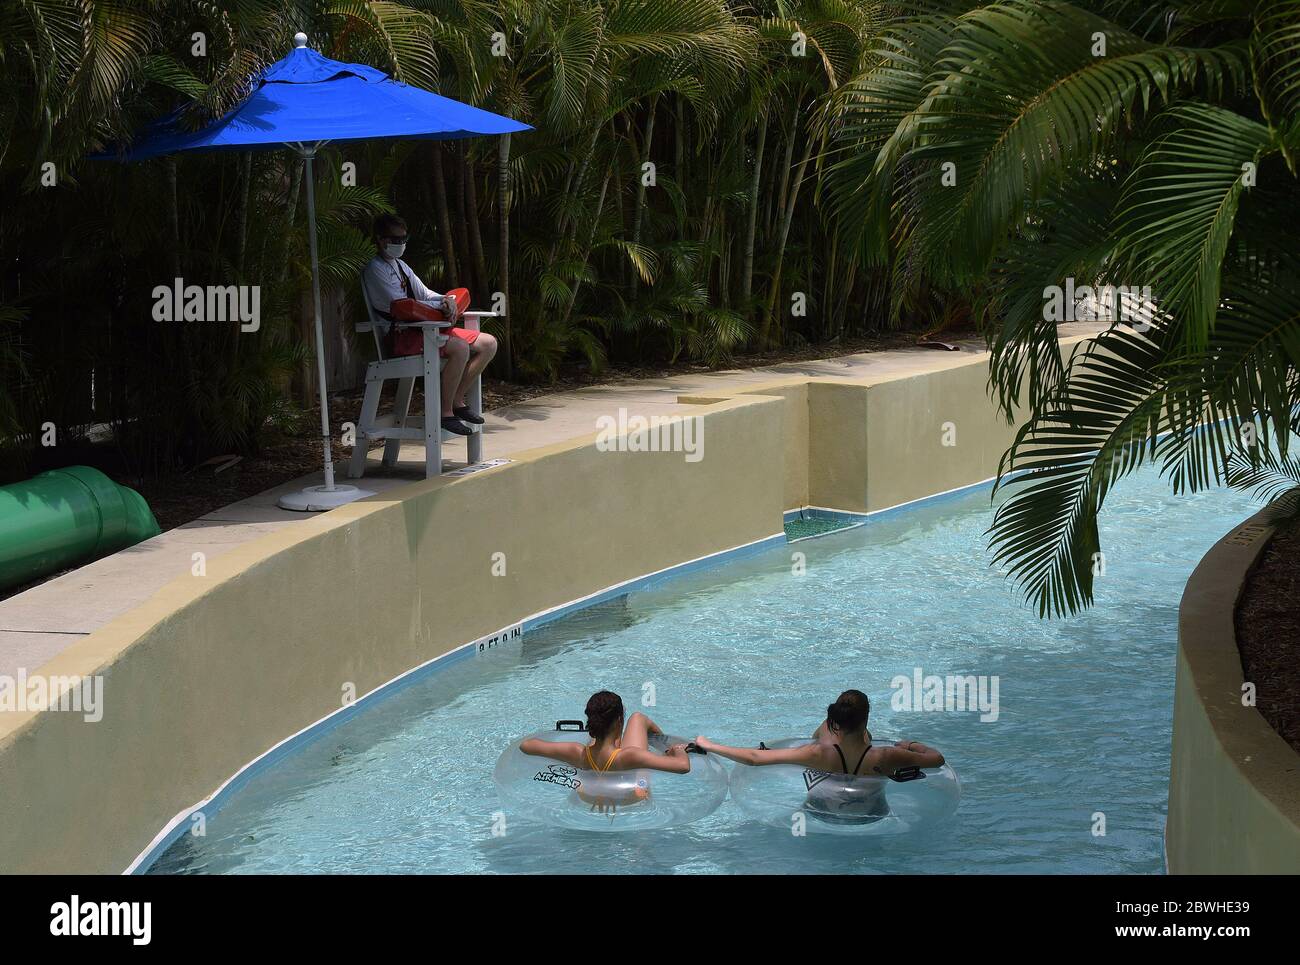 June 1, 2020 - Winter Haven, Florida, United States - Guests ride tubes on the lazy river at the LEGOLAND Florida Water Park on the day the theme park reopened to the public after closing in mid-March due to the coronavirus pandemic. Guests are now required to submit to temperature checks and the wearing of face coverings is recommended but not required. (Paul Hennessy/Alamy Live News) Stock Photo